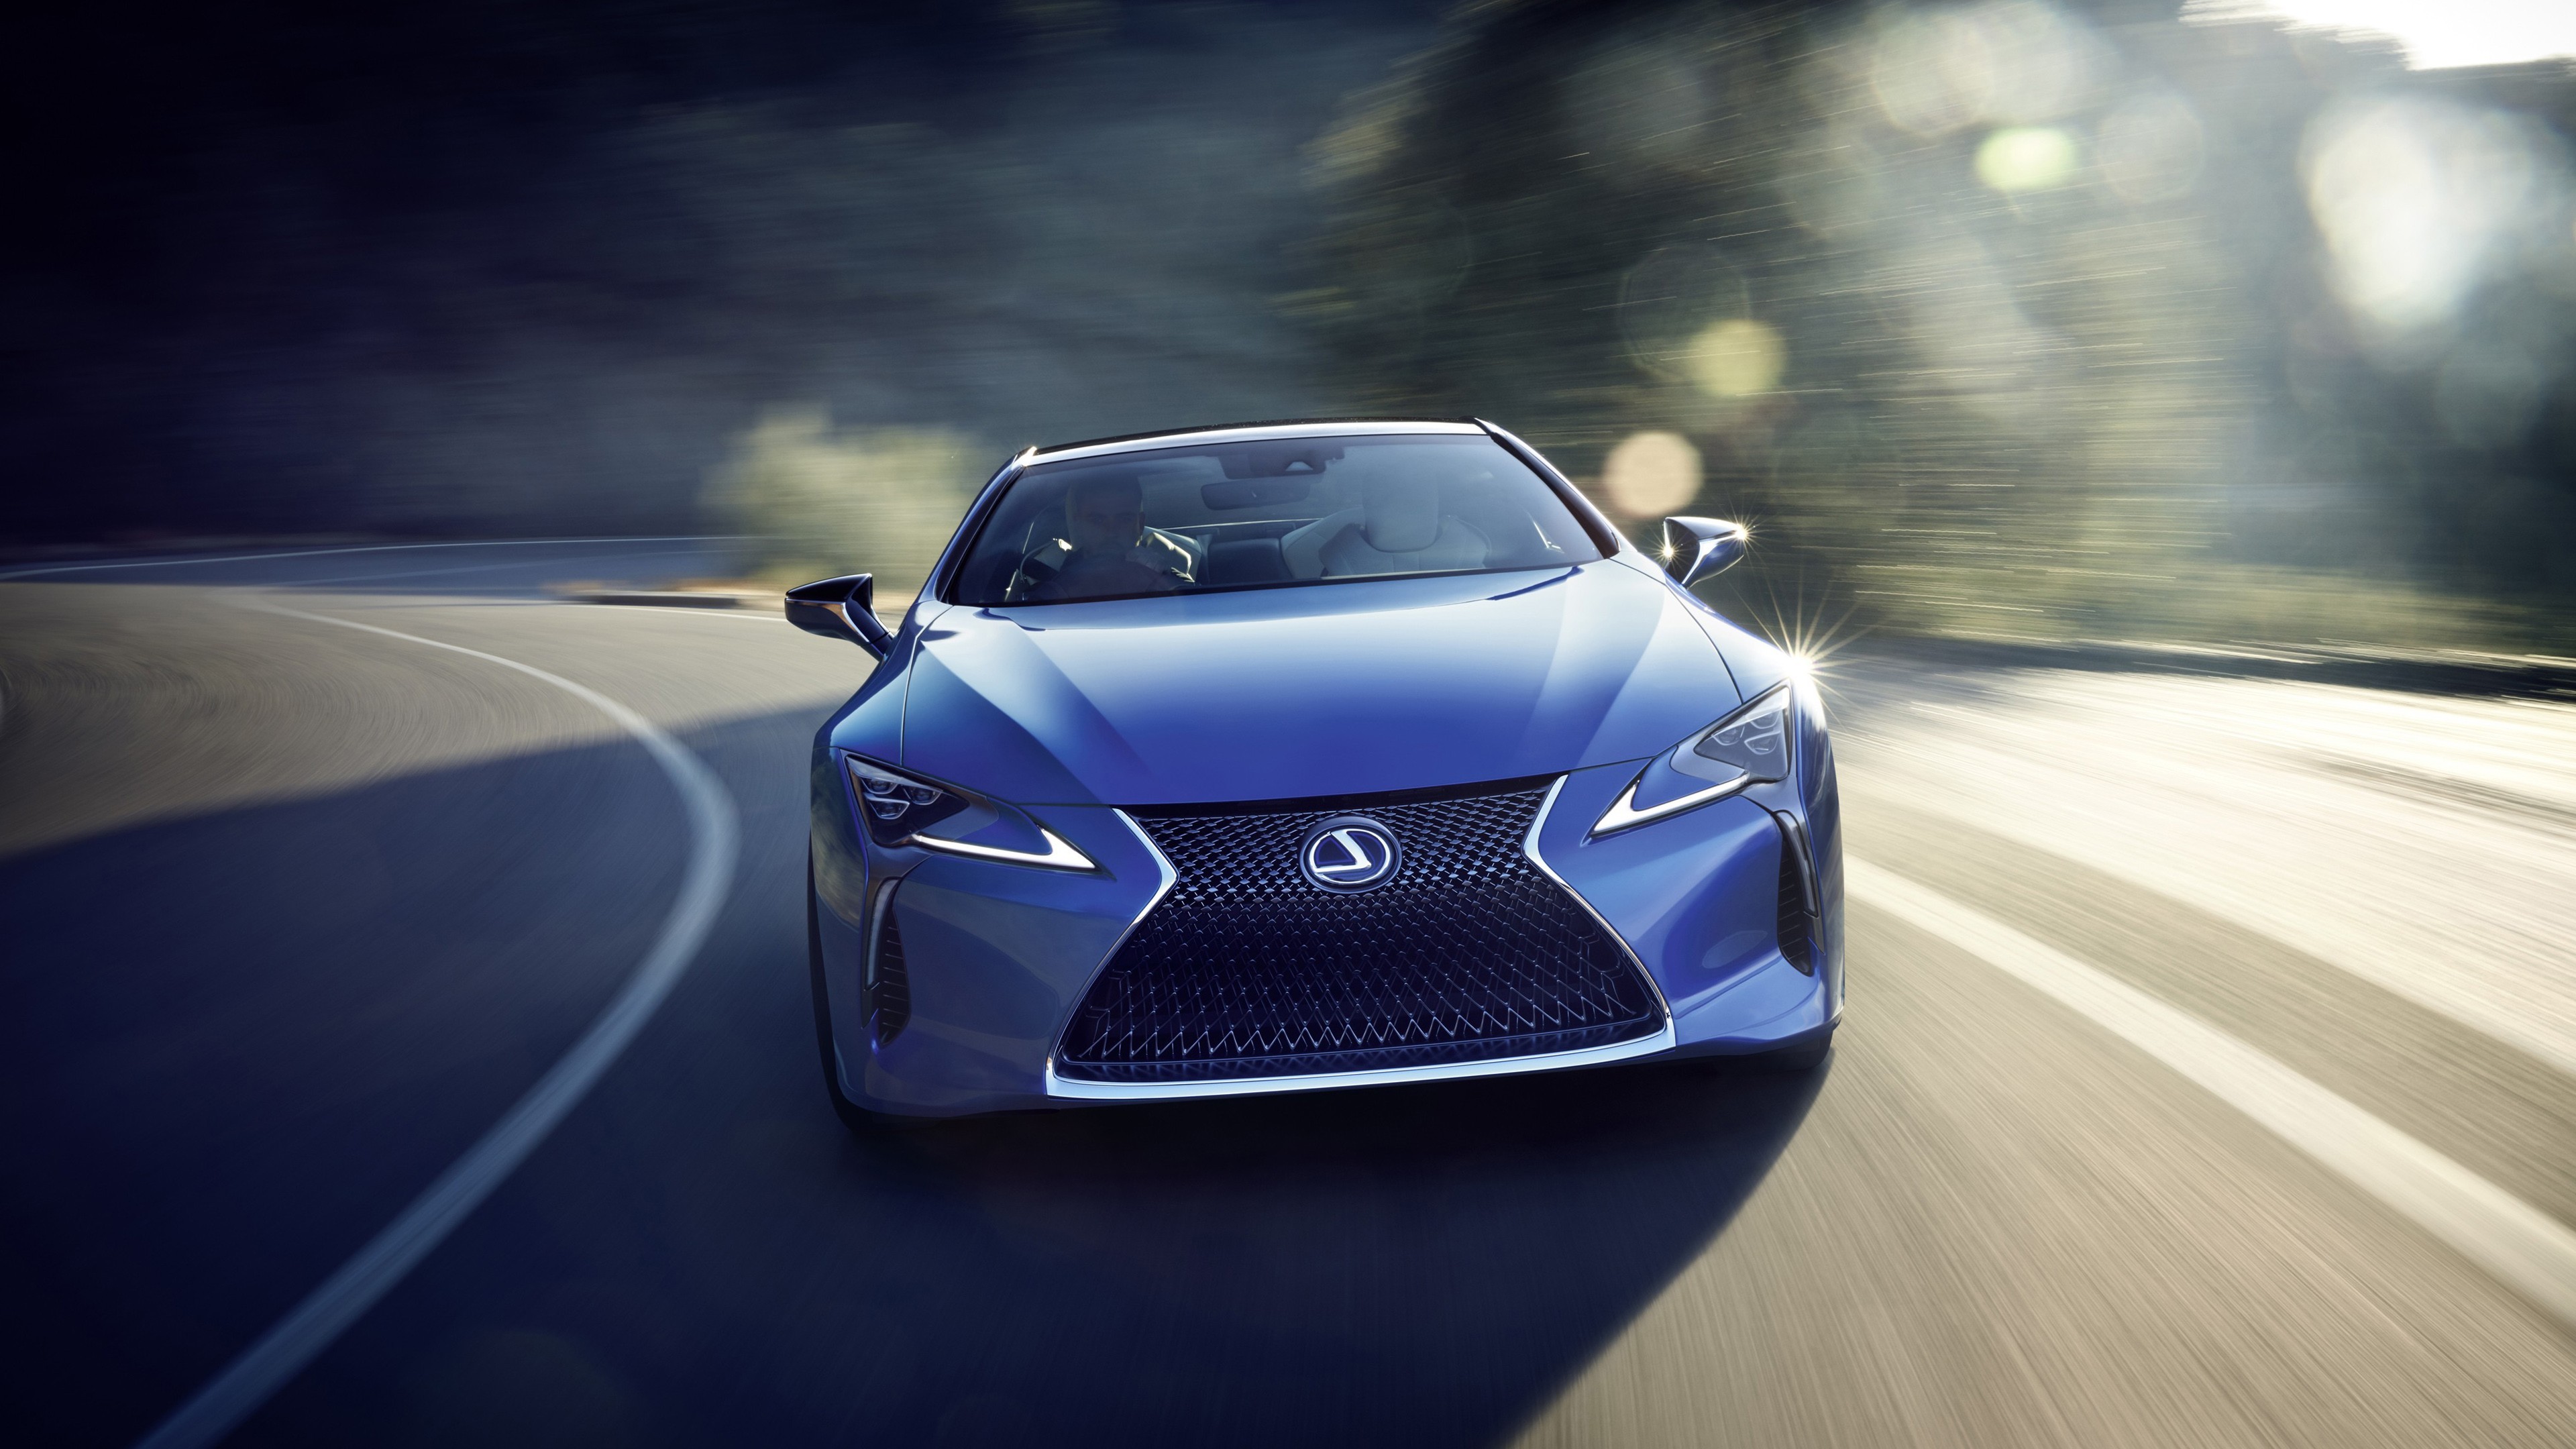 2880x1800 2017 Lexus Lc 500 Macbook Pro Retina HD 4k Wallpapers, Images,  Backgrounds, Photos and Pictures